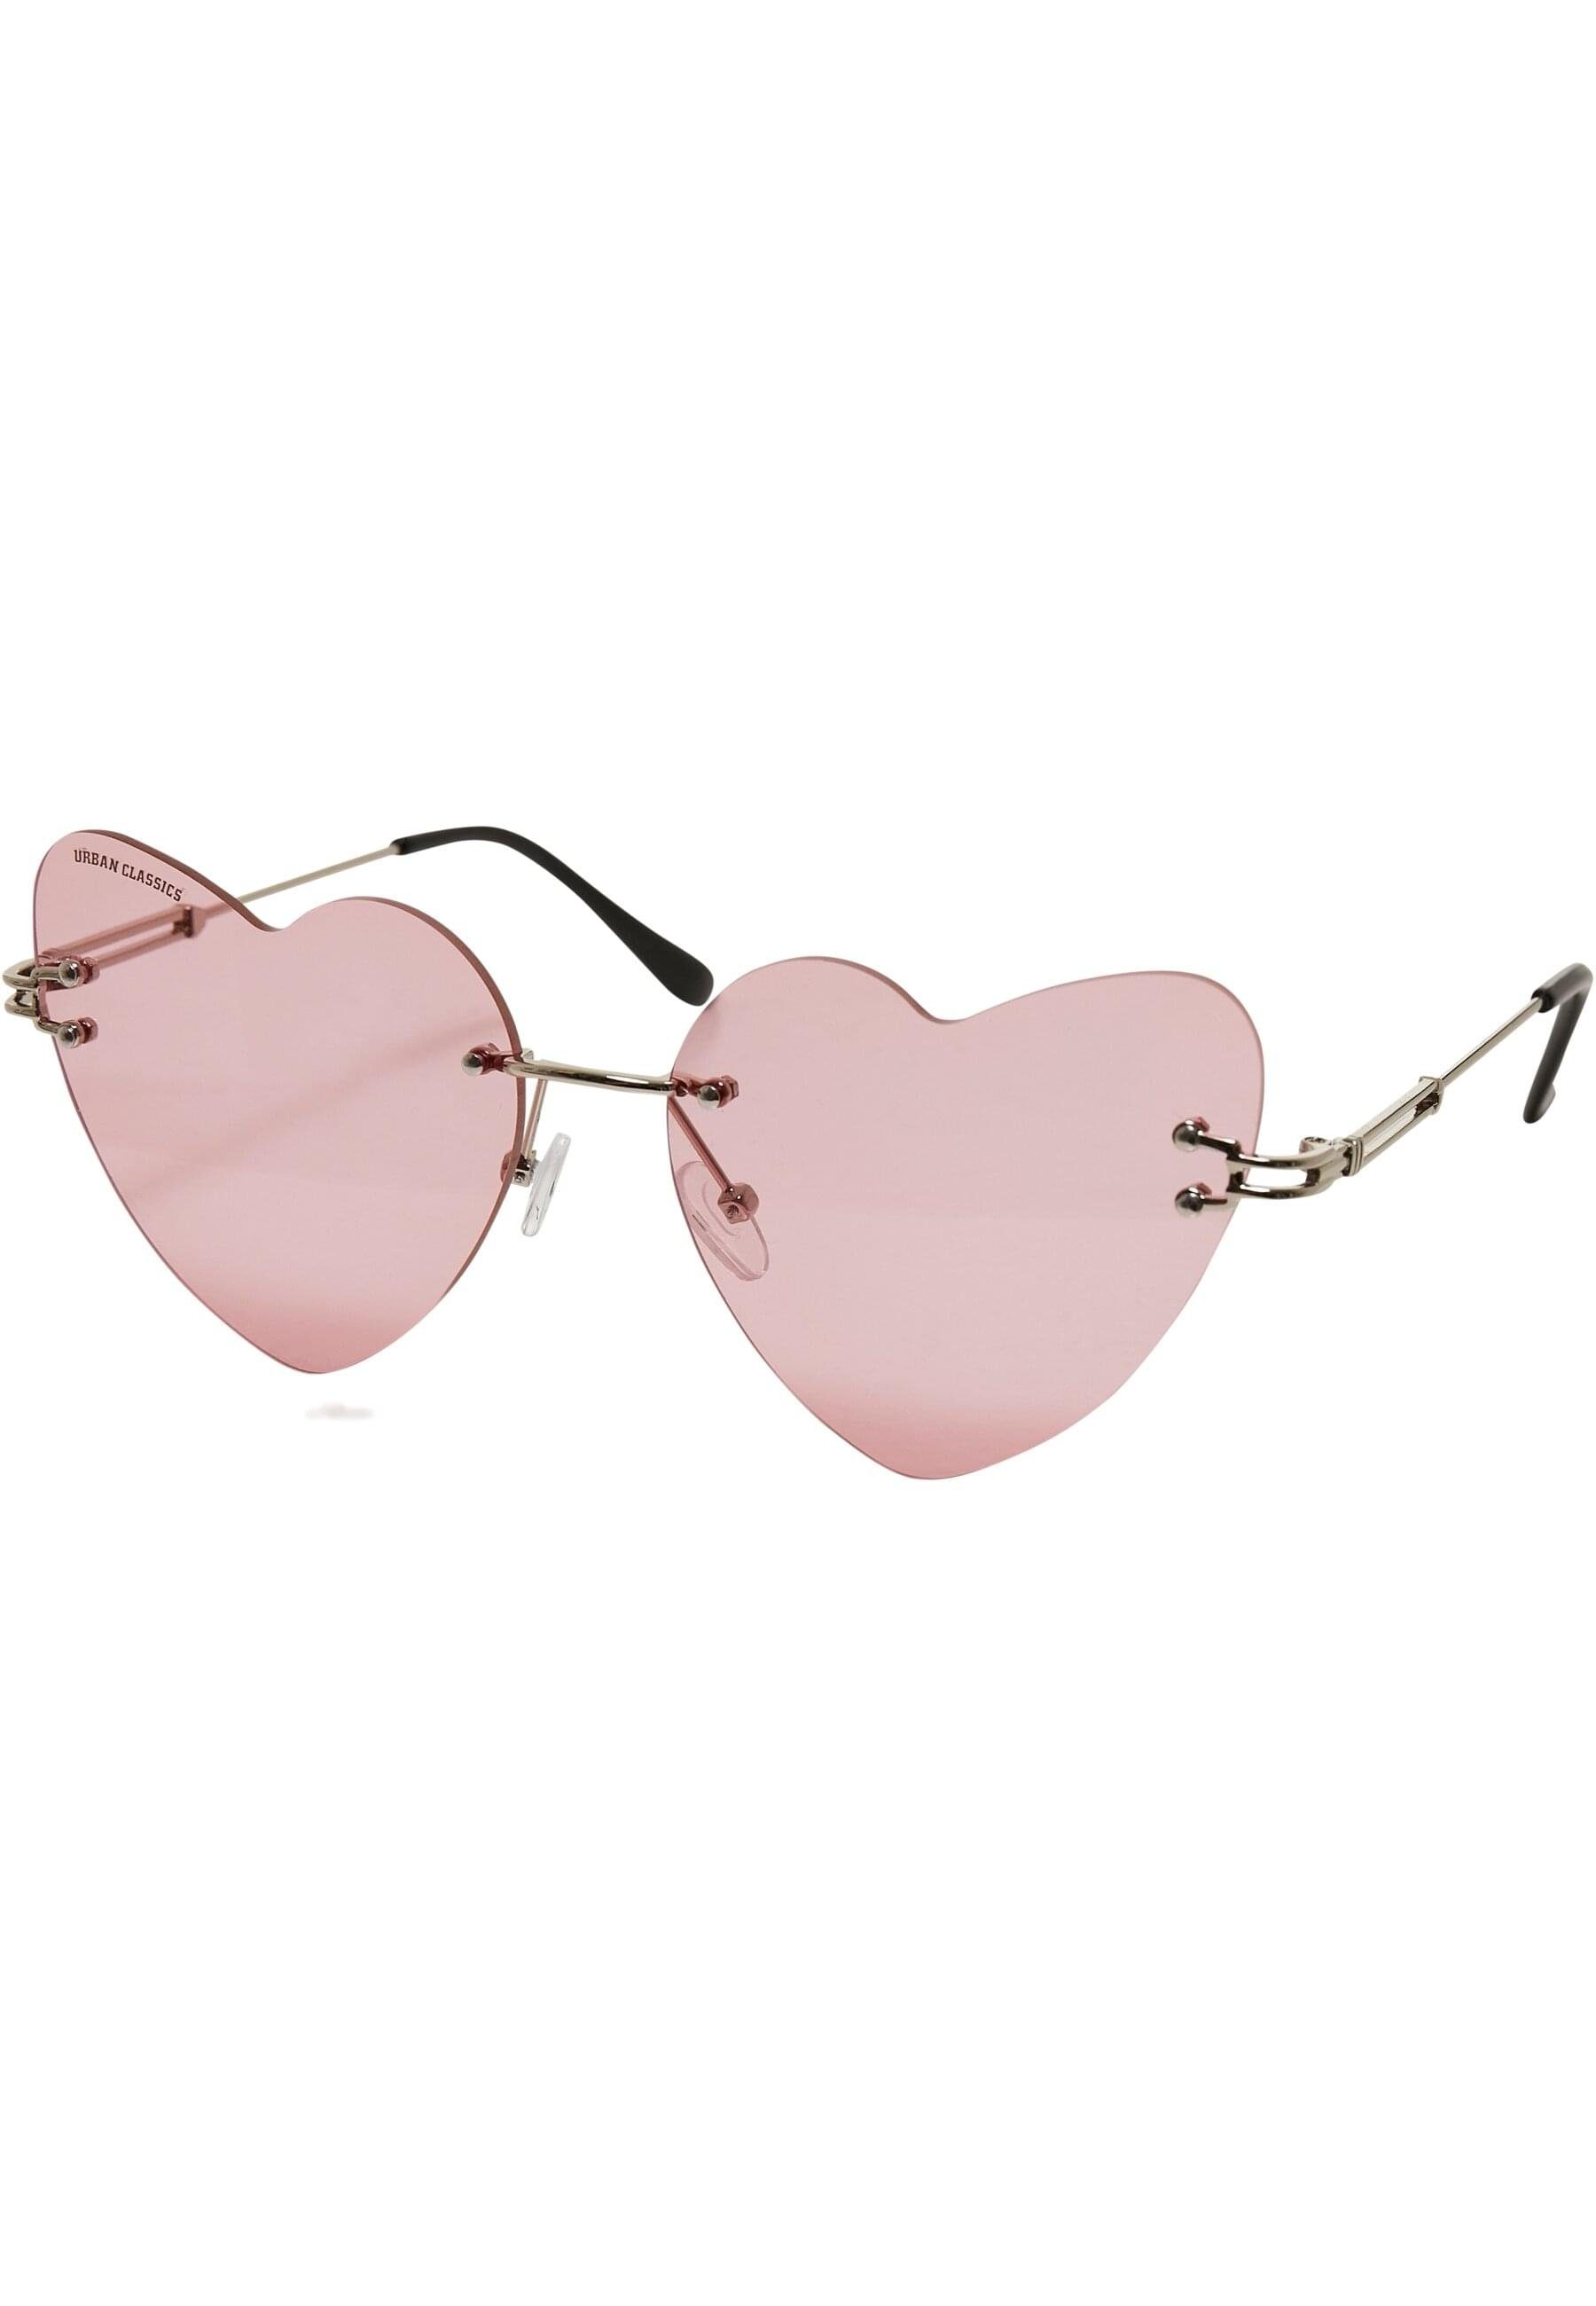 Sunglasses Heart With CLASSICS Chain Unisex Sonnenbrille rose/silver URBAN